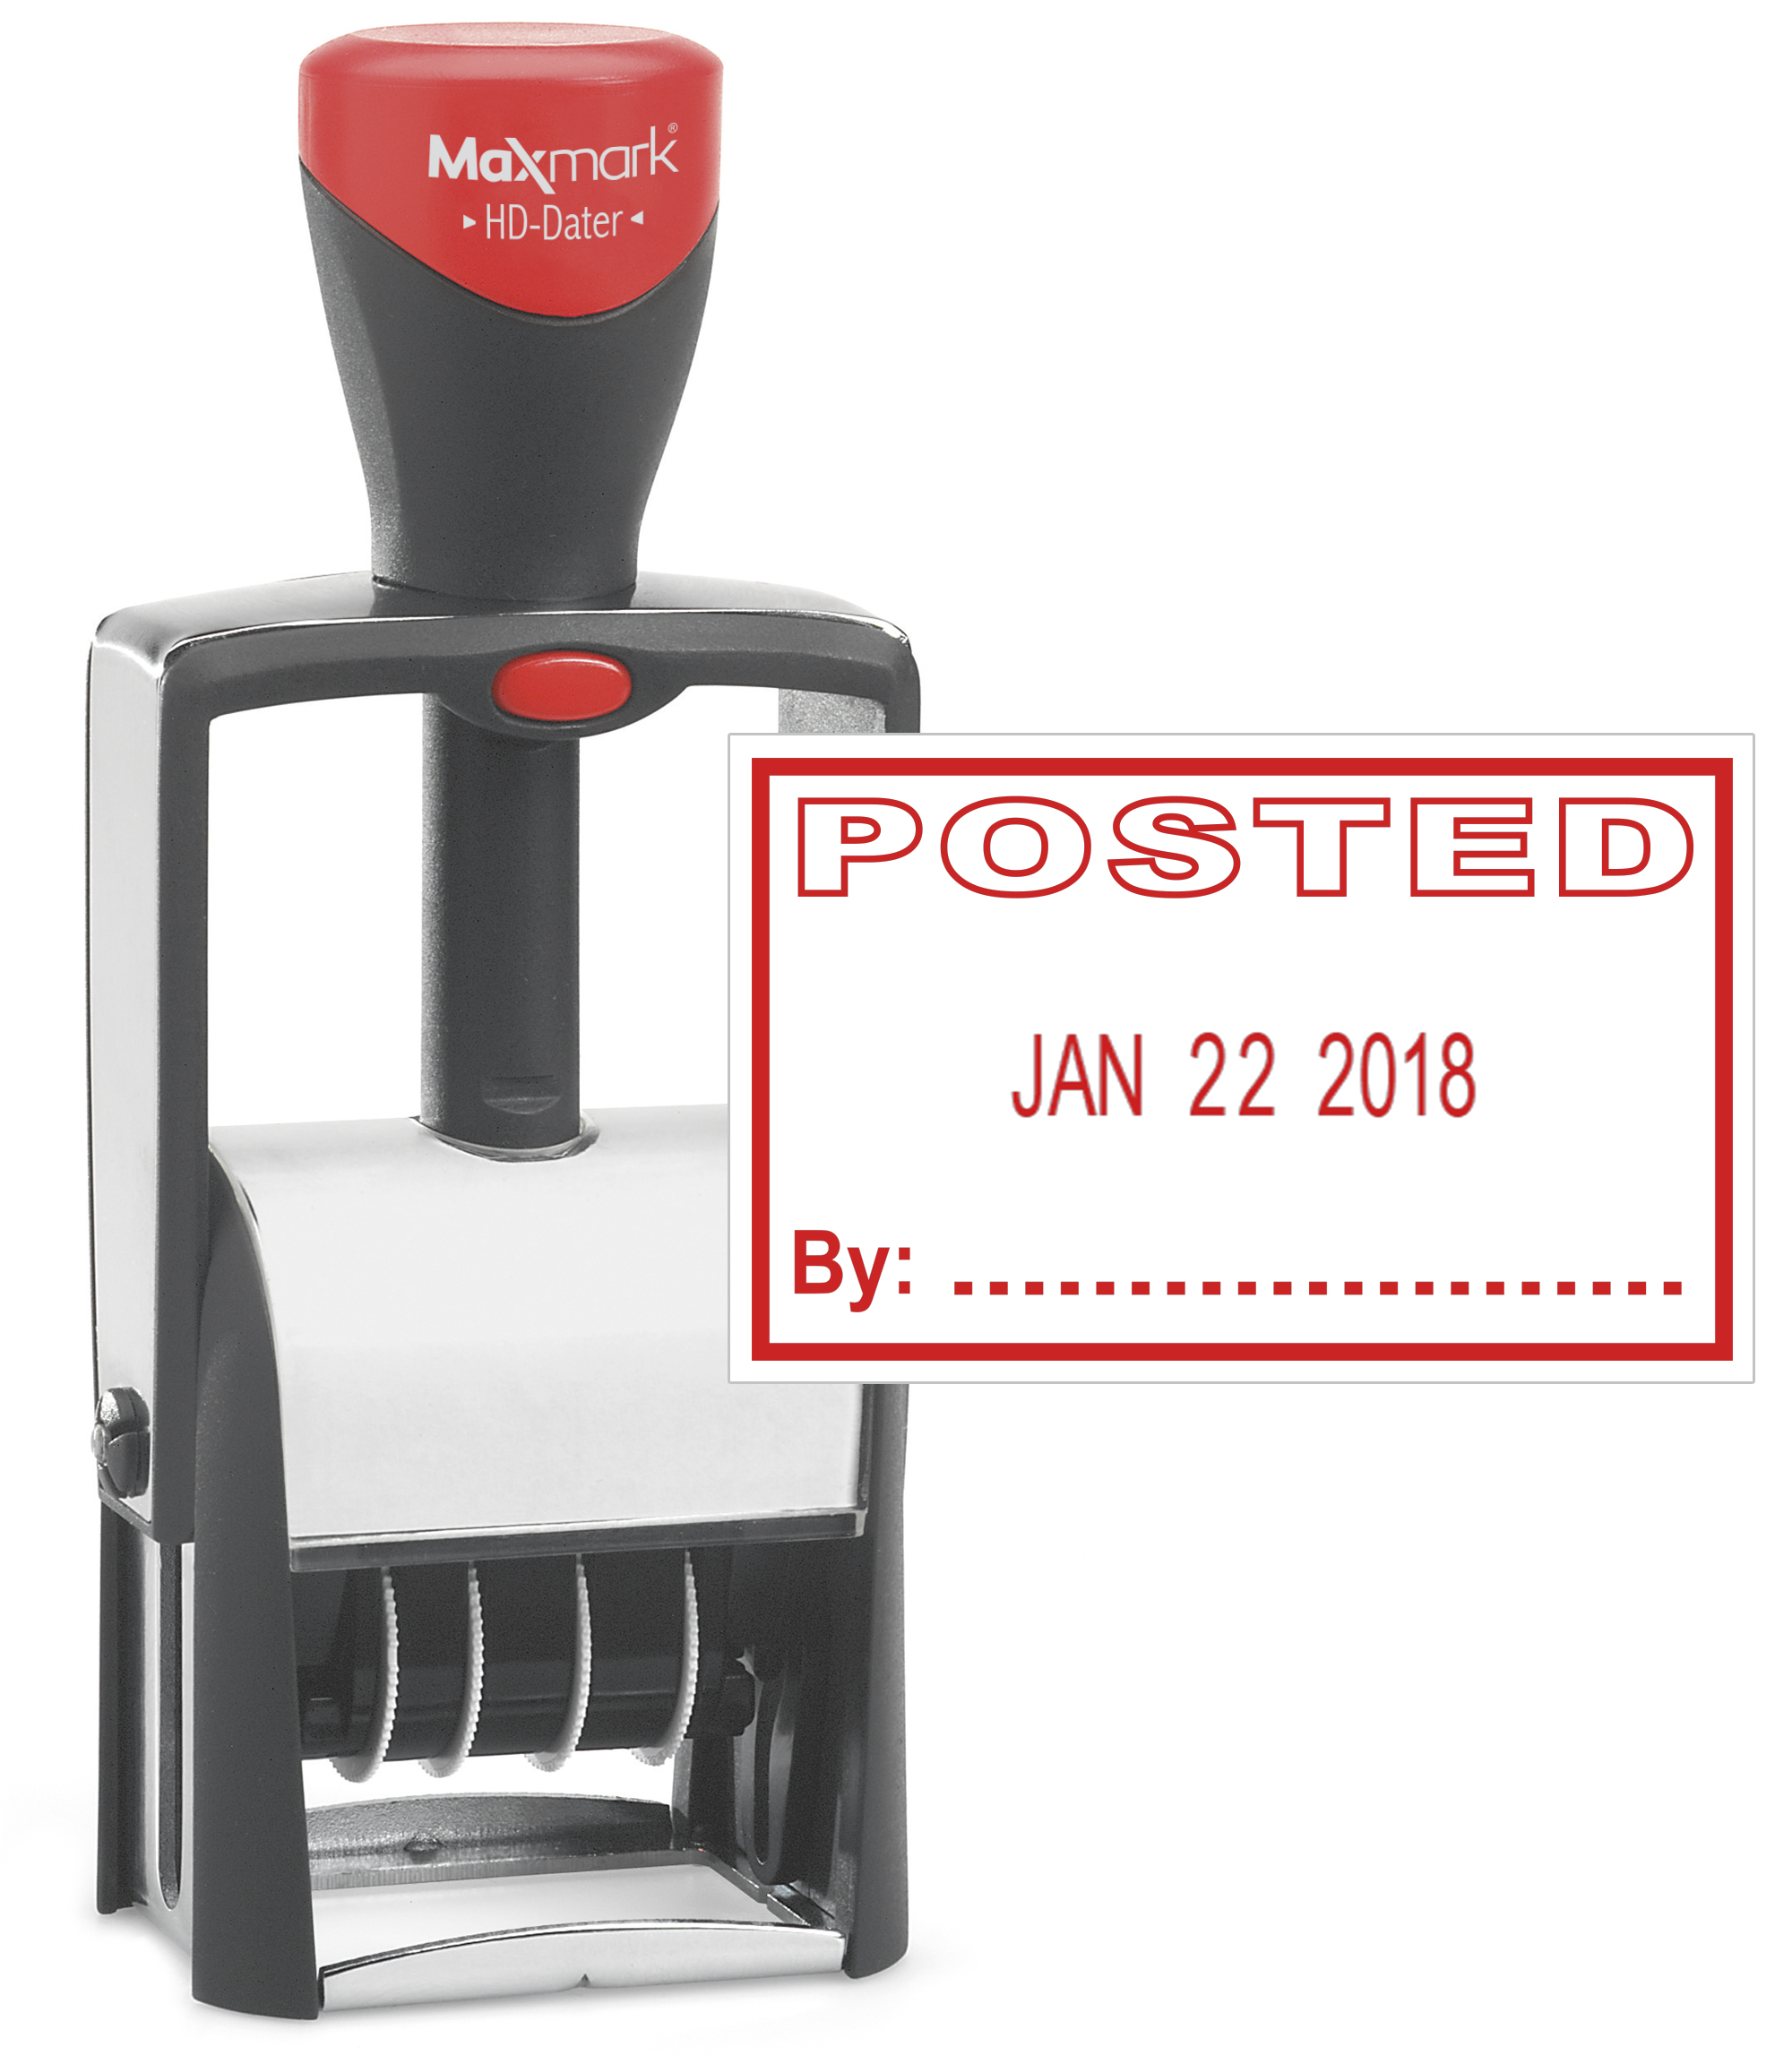 Heavy Duty Date Stamp with "POSTED" Self Inking Stamp - RED Ink